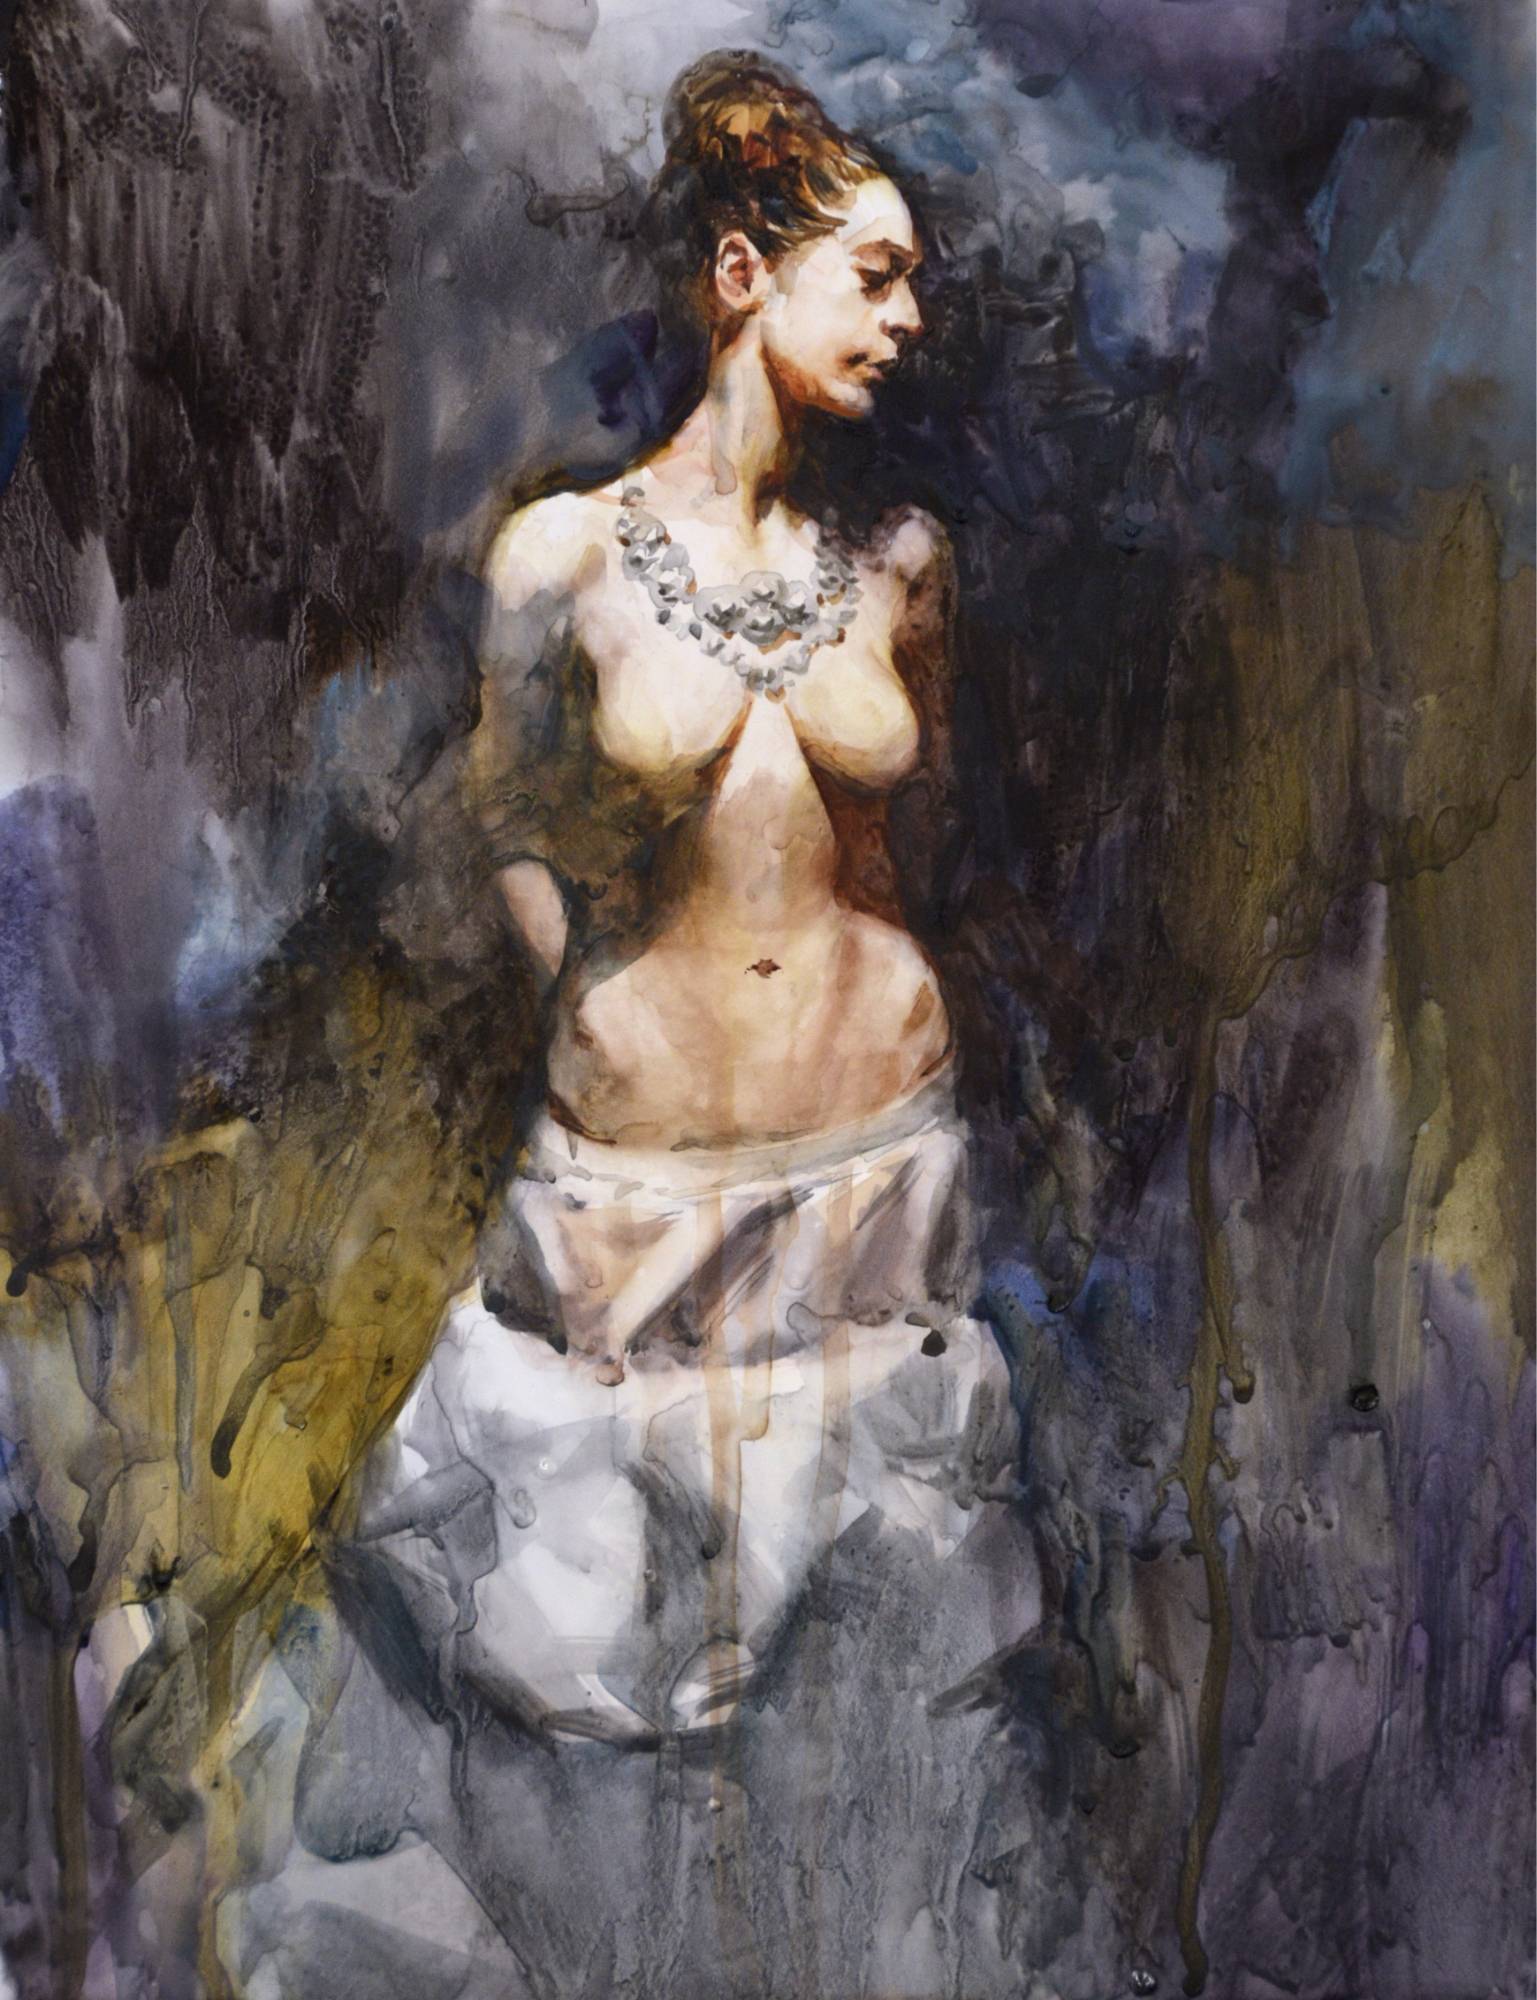 Watercolor painting of a partially nude figure wearing a white skirt and necklace